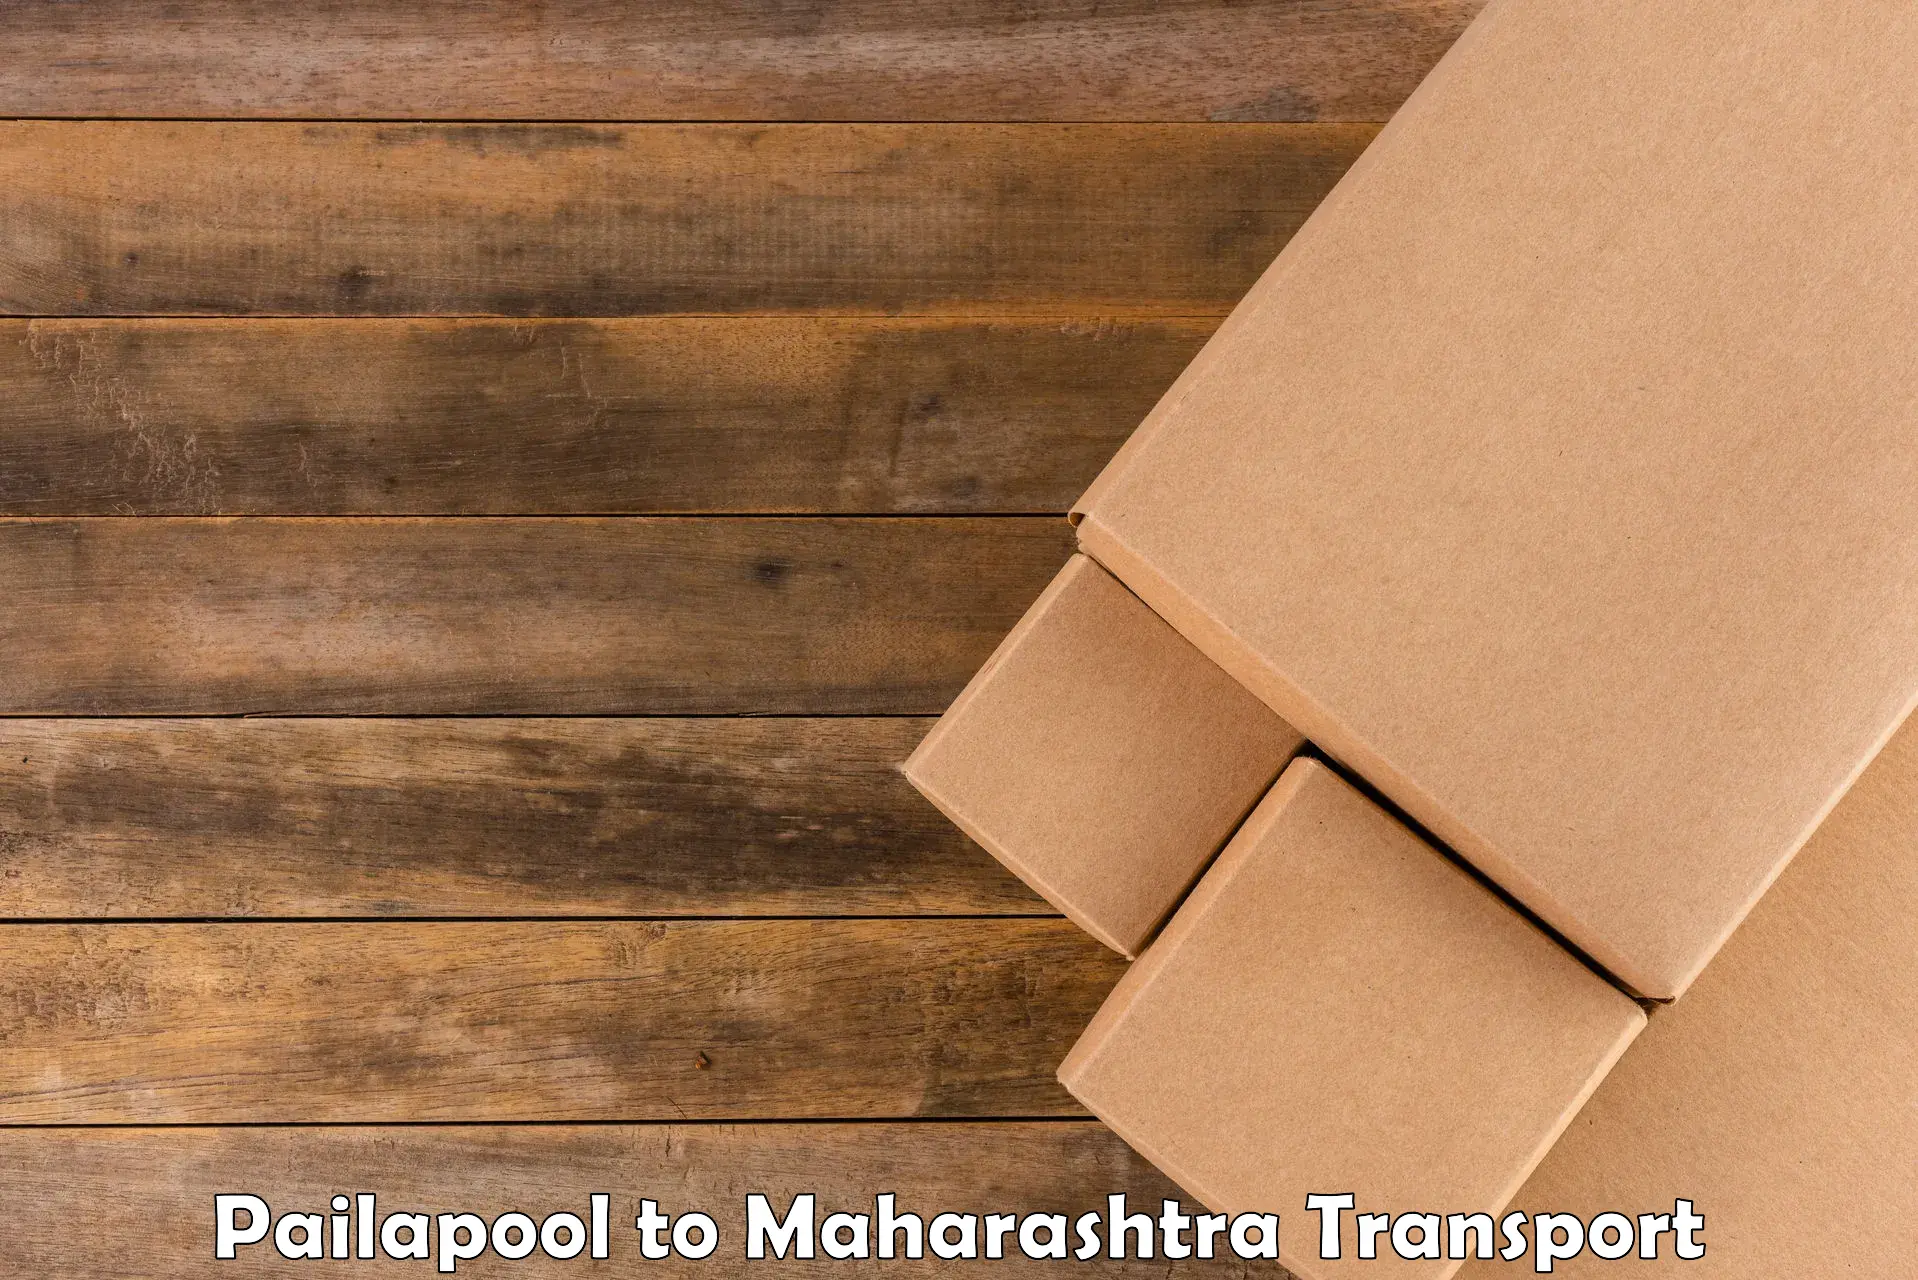 Cargo train transport services Pailapool to Greater Thane